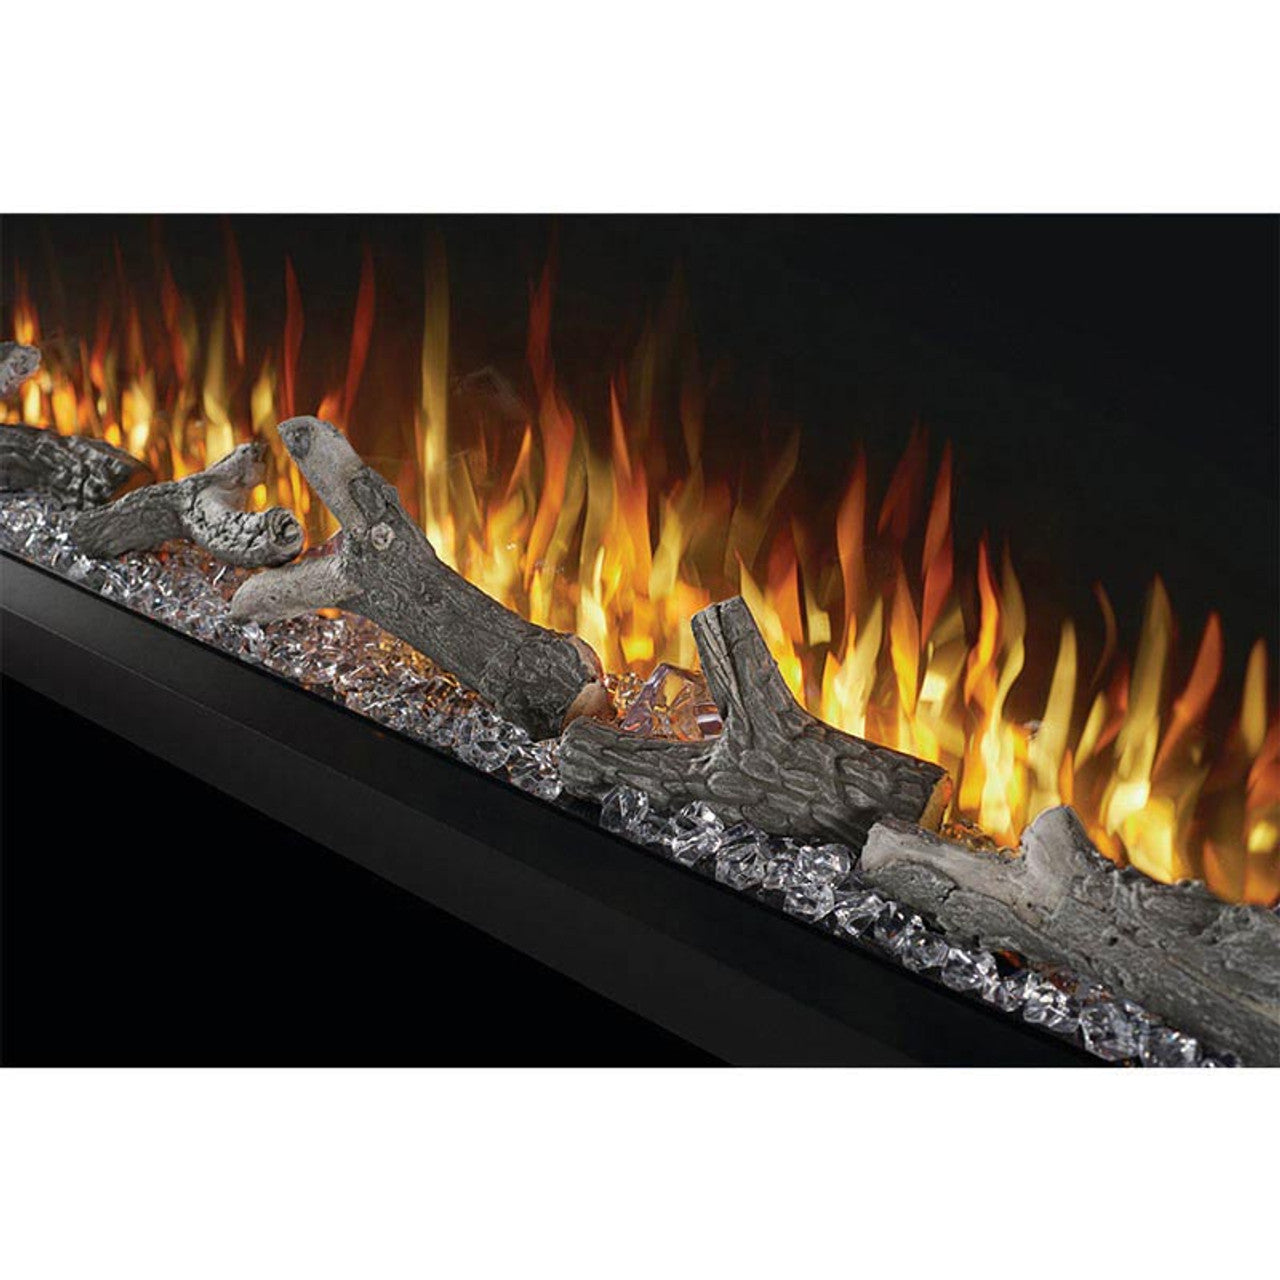 Trivista 50 3-Sided Built-In Electric Linear Fireplace - NEFB50H-3SV - Chimney Cricket